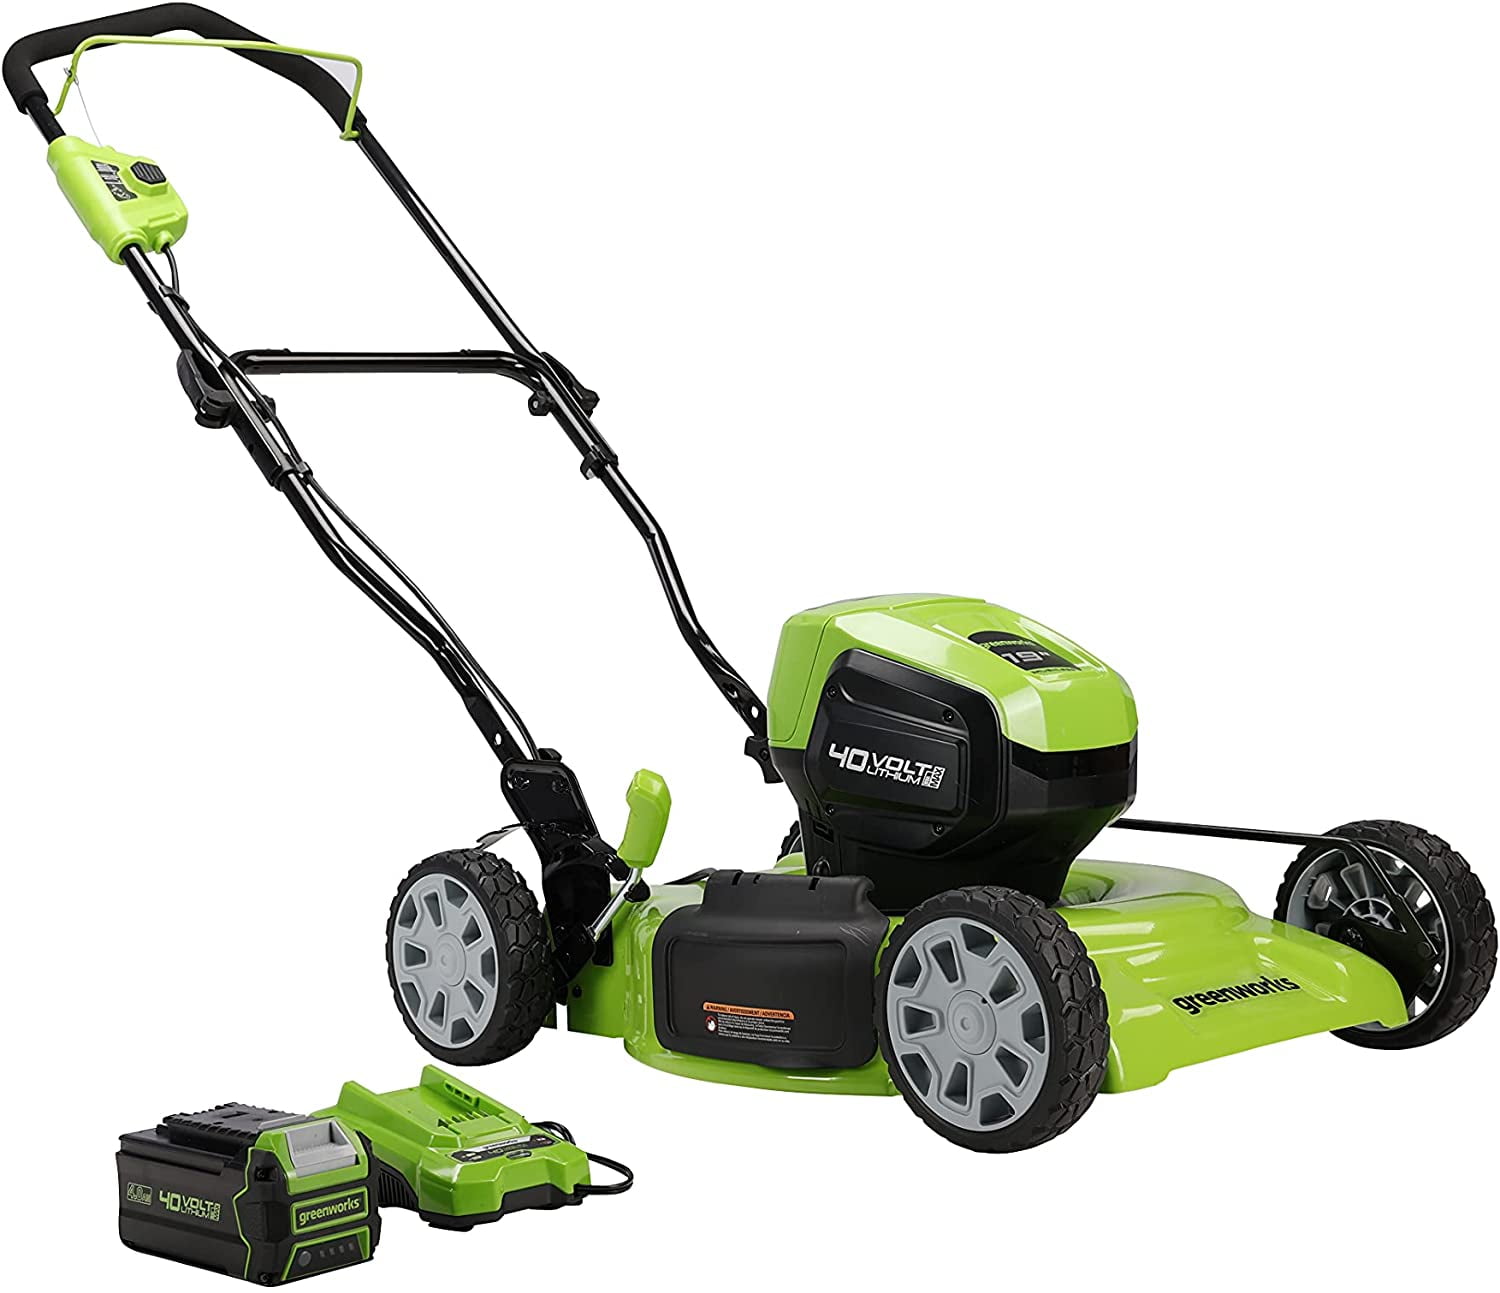 Greenworks 40V 19-inch Brushless Walk-Behind Lawn Mower W/ 4.0 Ah Battery and Charger, 2524902AZ, $208, free shipping, Walmart